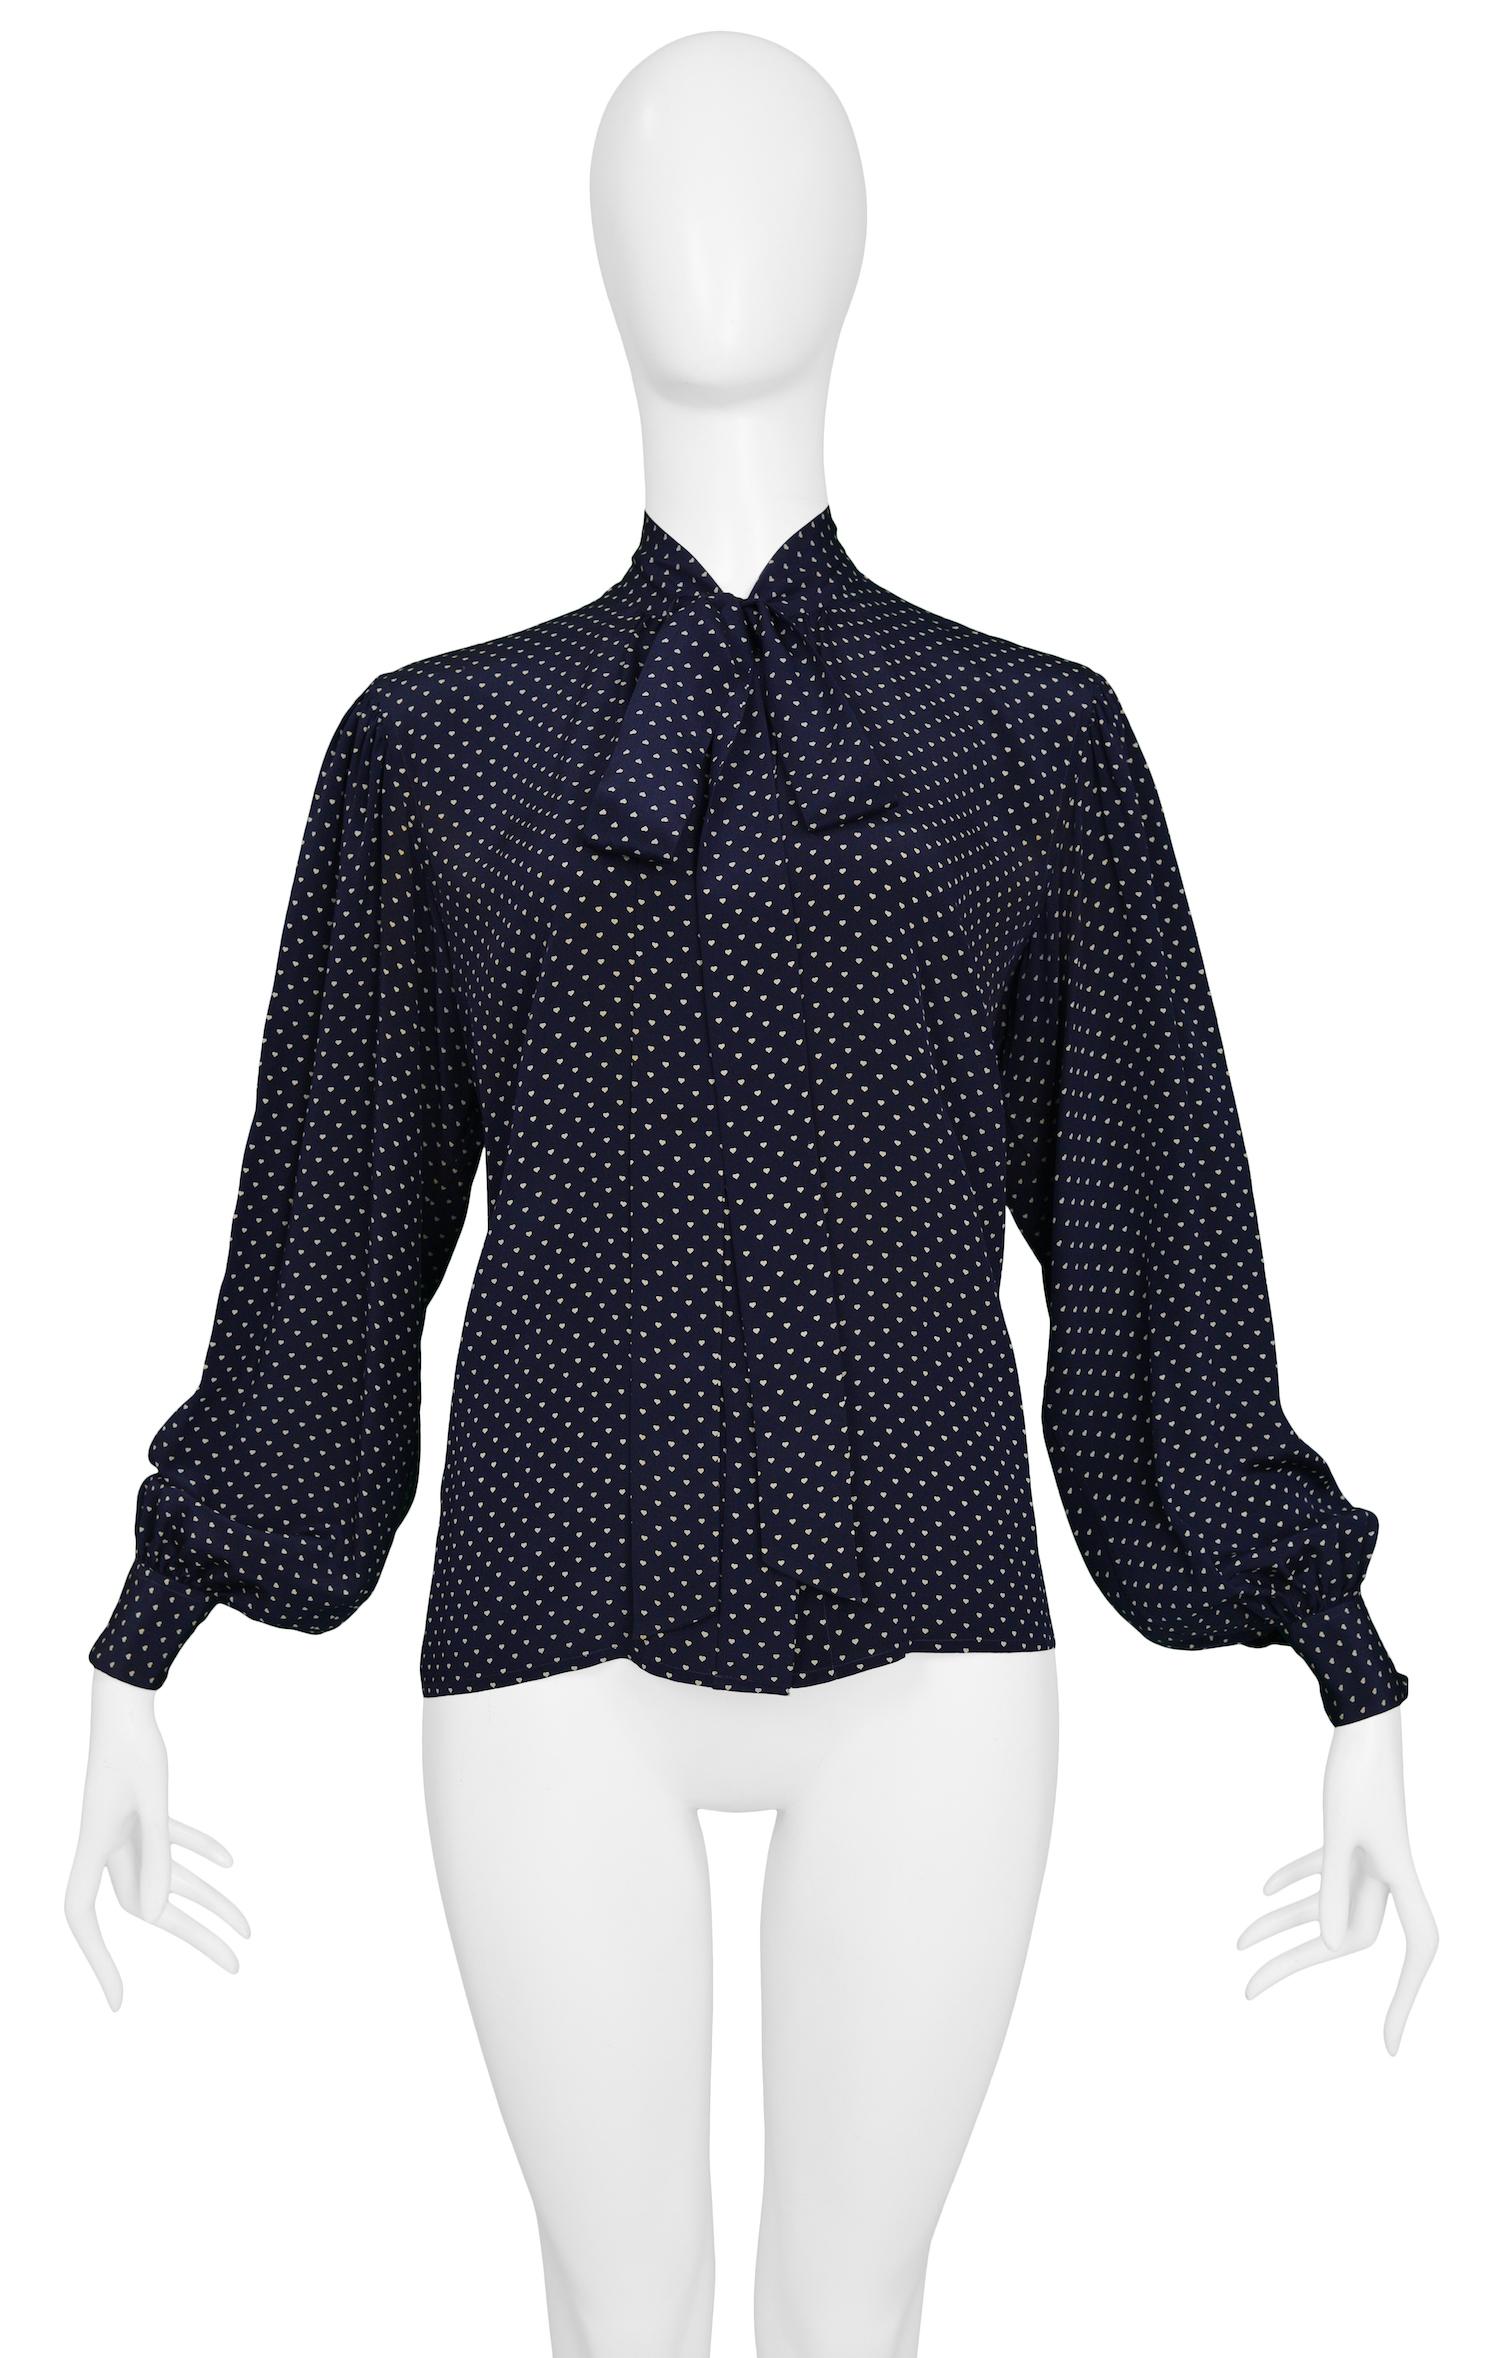 Vintage Yves Saint Laurent navy blue silk pussy bow blouse featuring delicate white hearts printed throughout. 

Excellent Condition.

Size: 42
